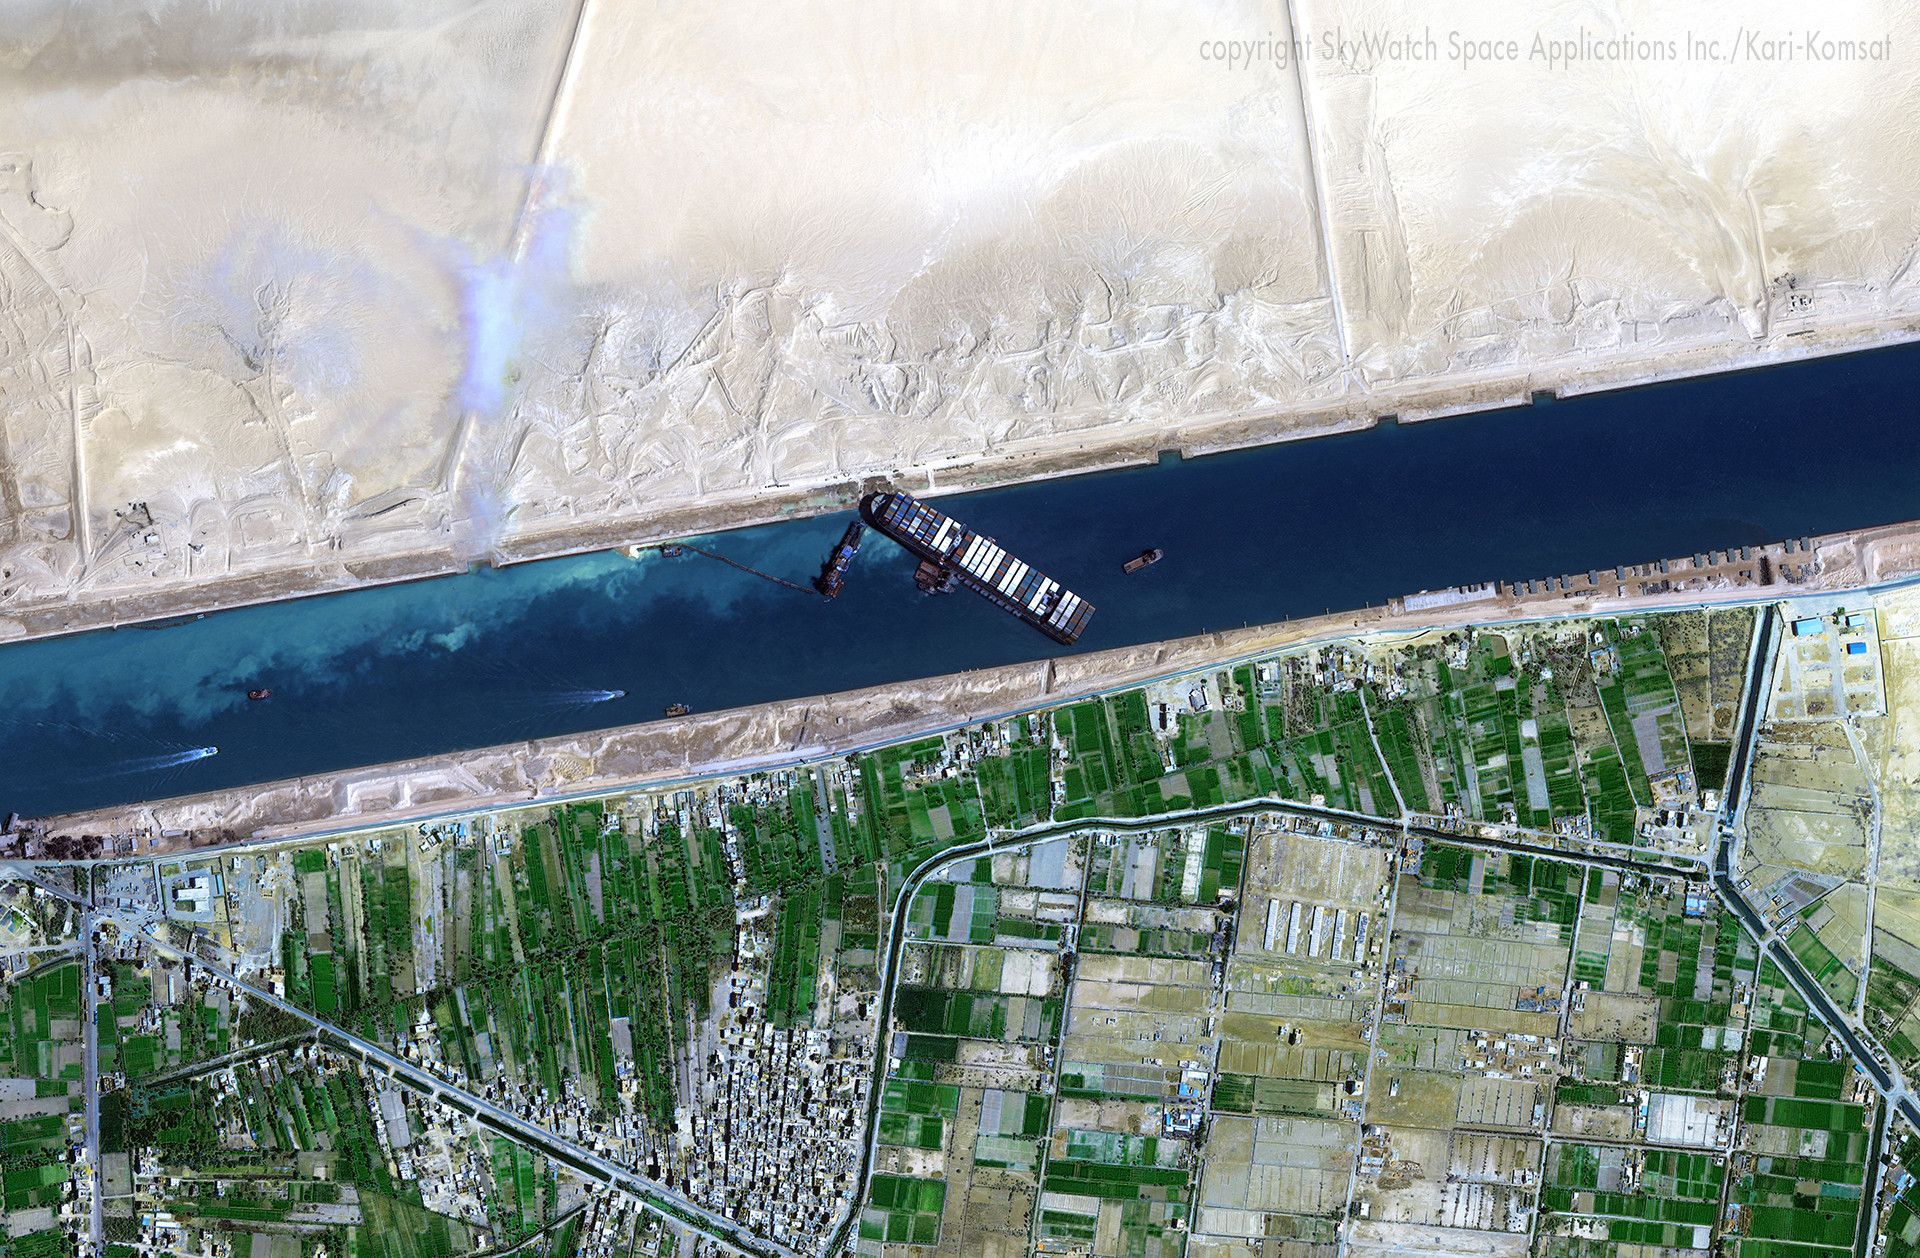 Satellite image of the Ever Given wedged in the banks of the Suez Canal – copyright SkyWatch Space Applications Inc./Kari-Komsat